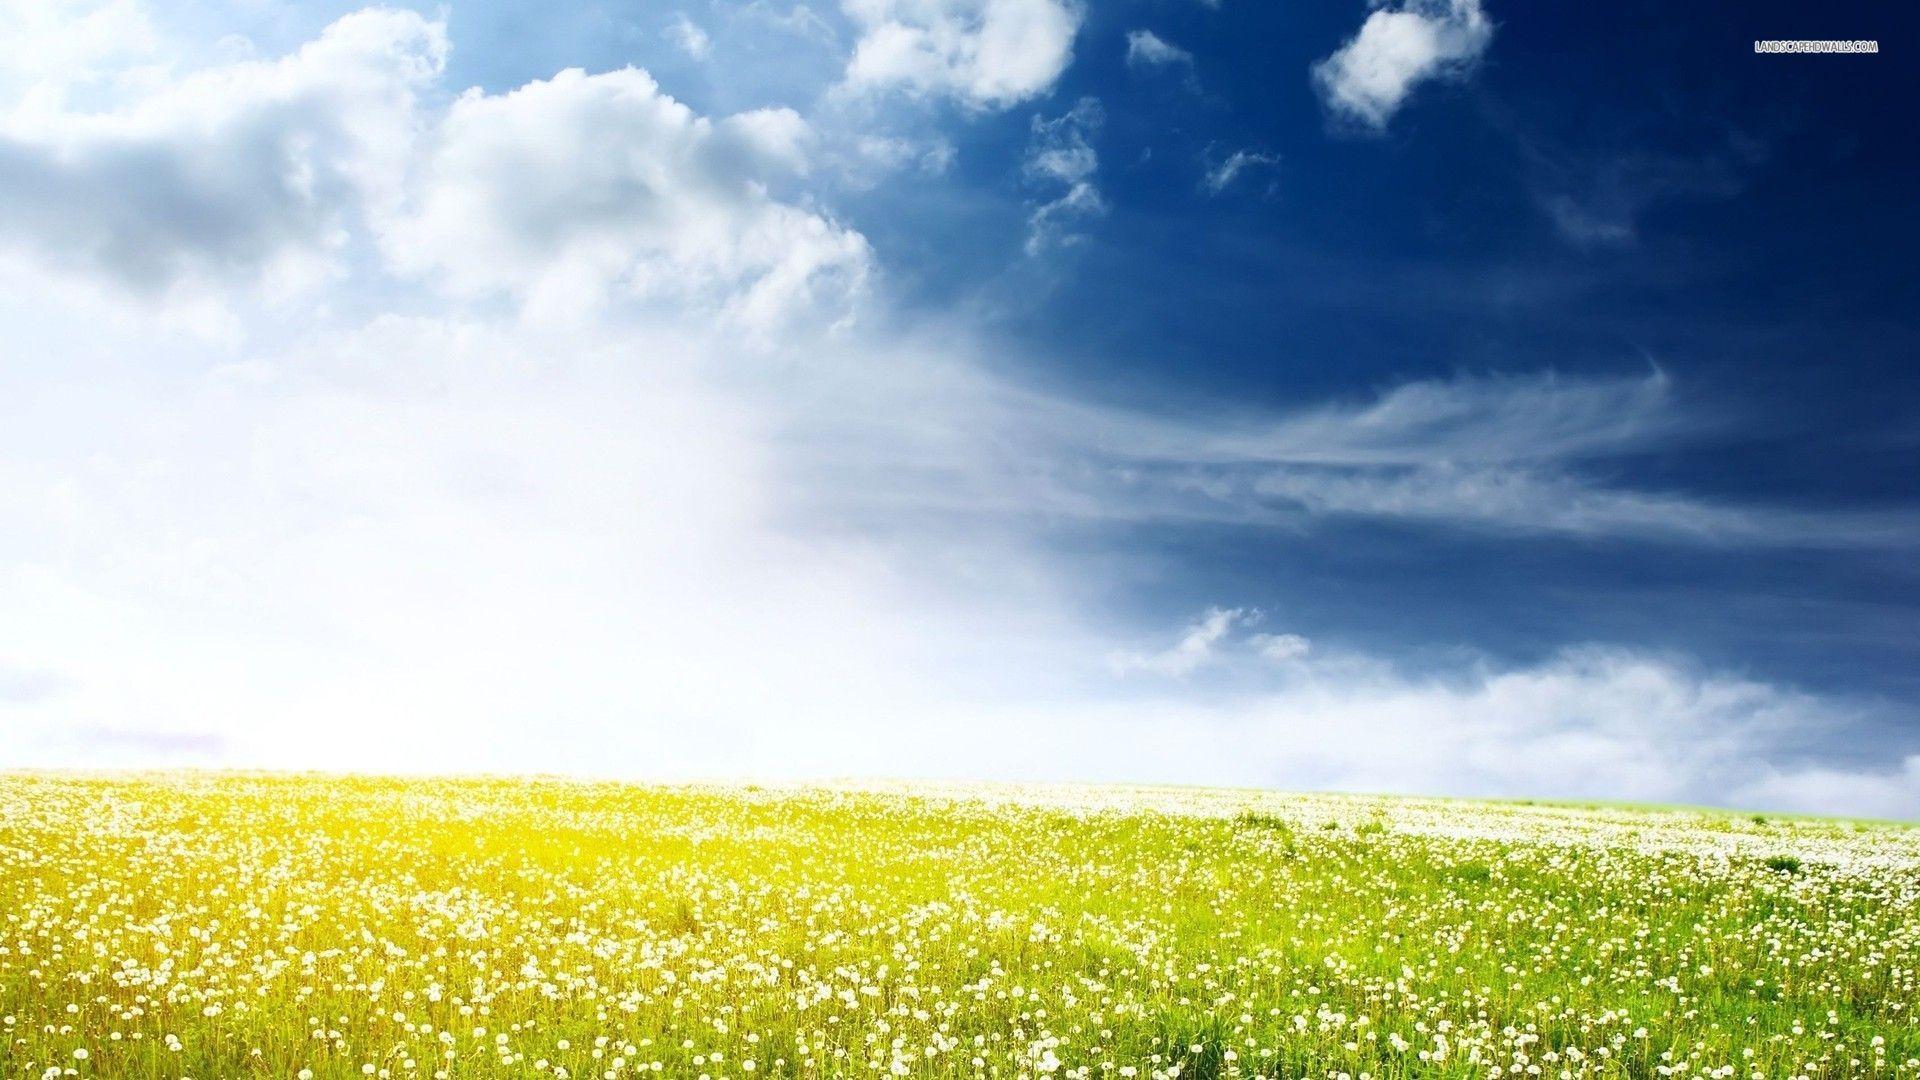 Sunny HD Widescreen 10 HD Wallpaper. Hdimges